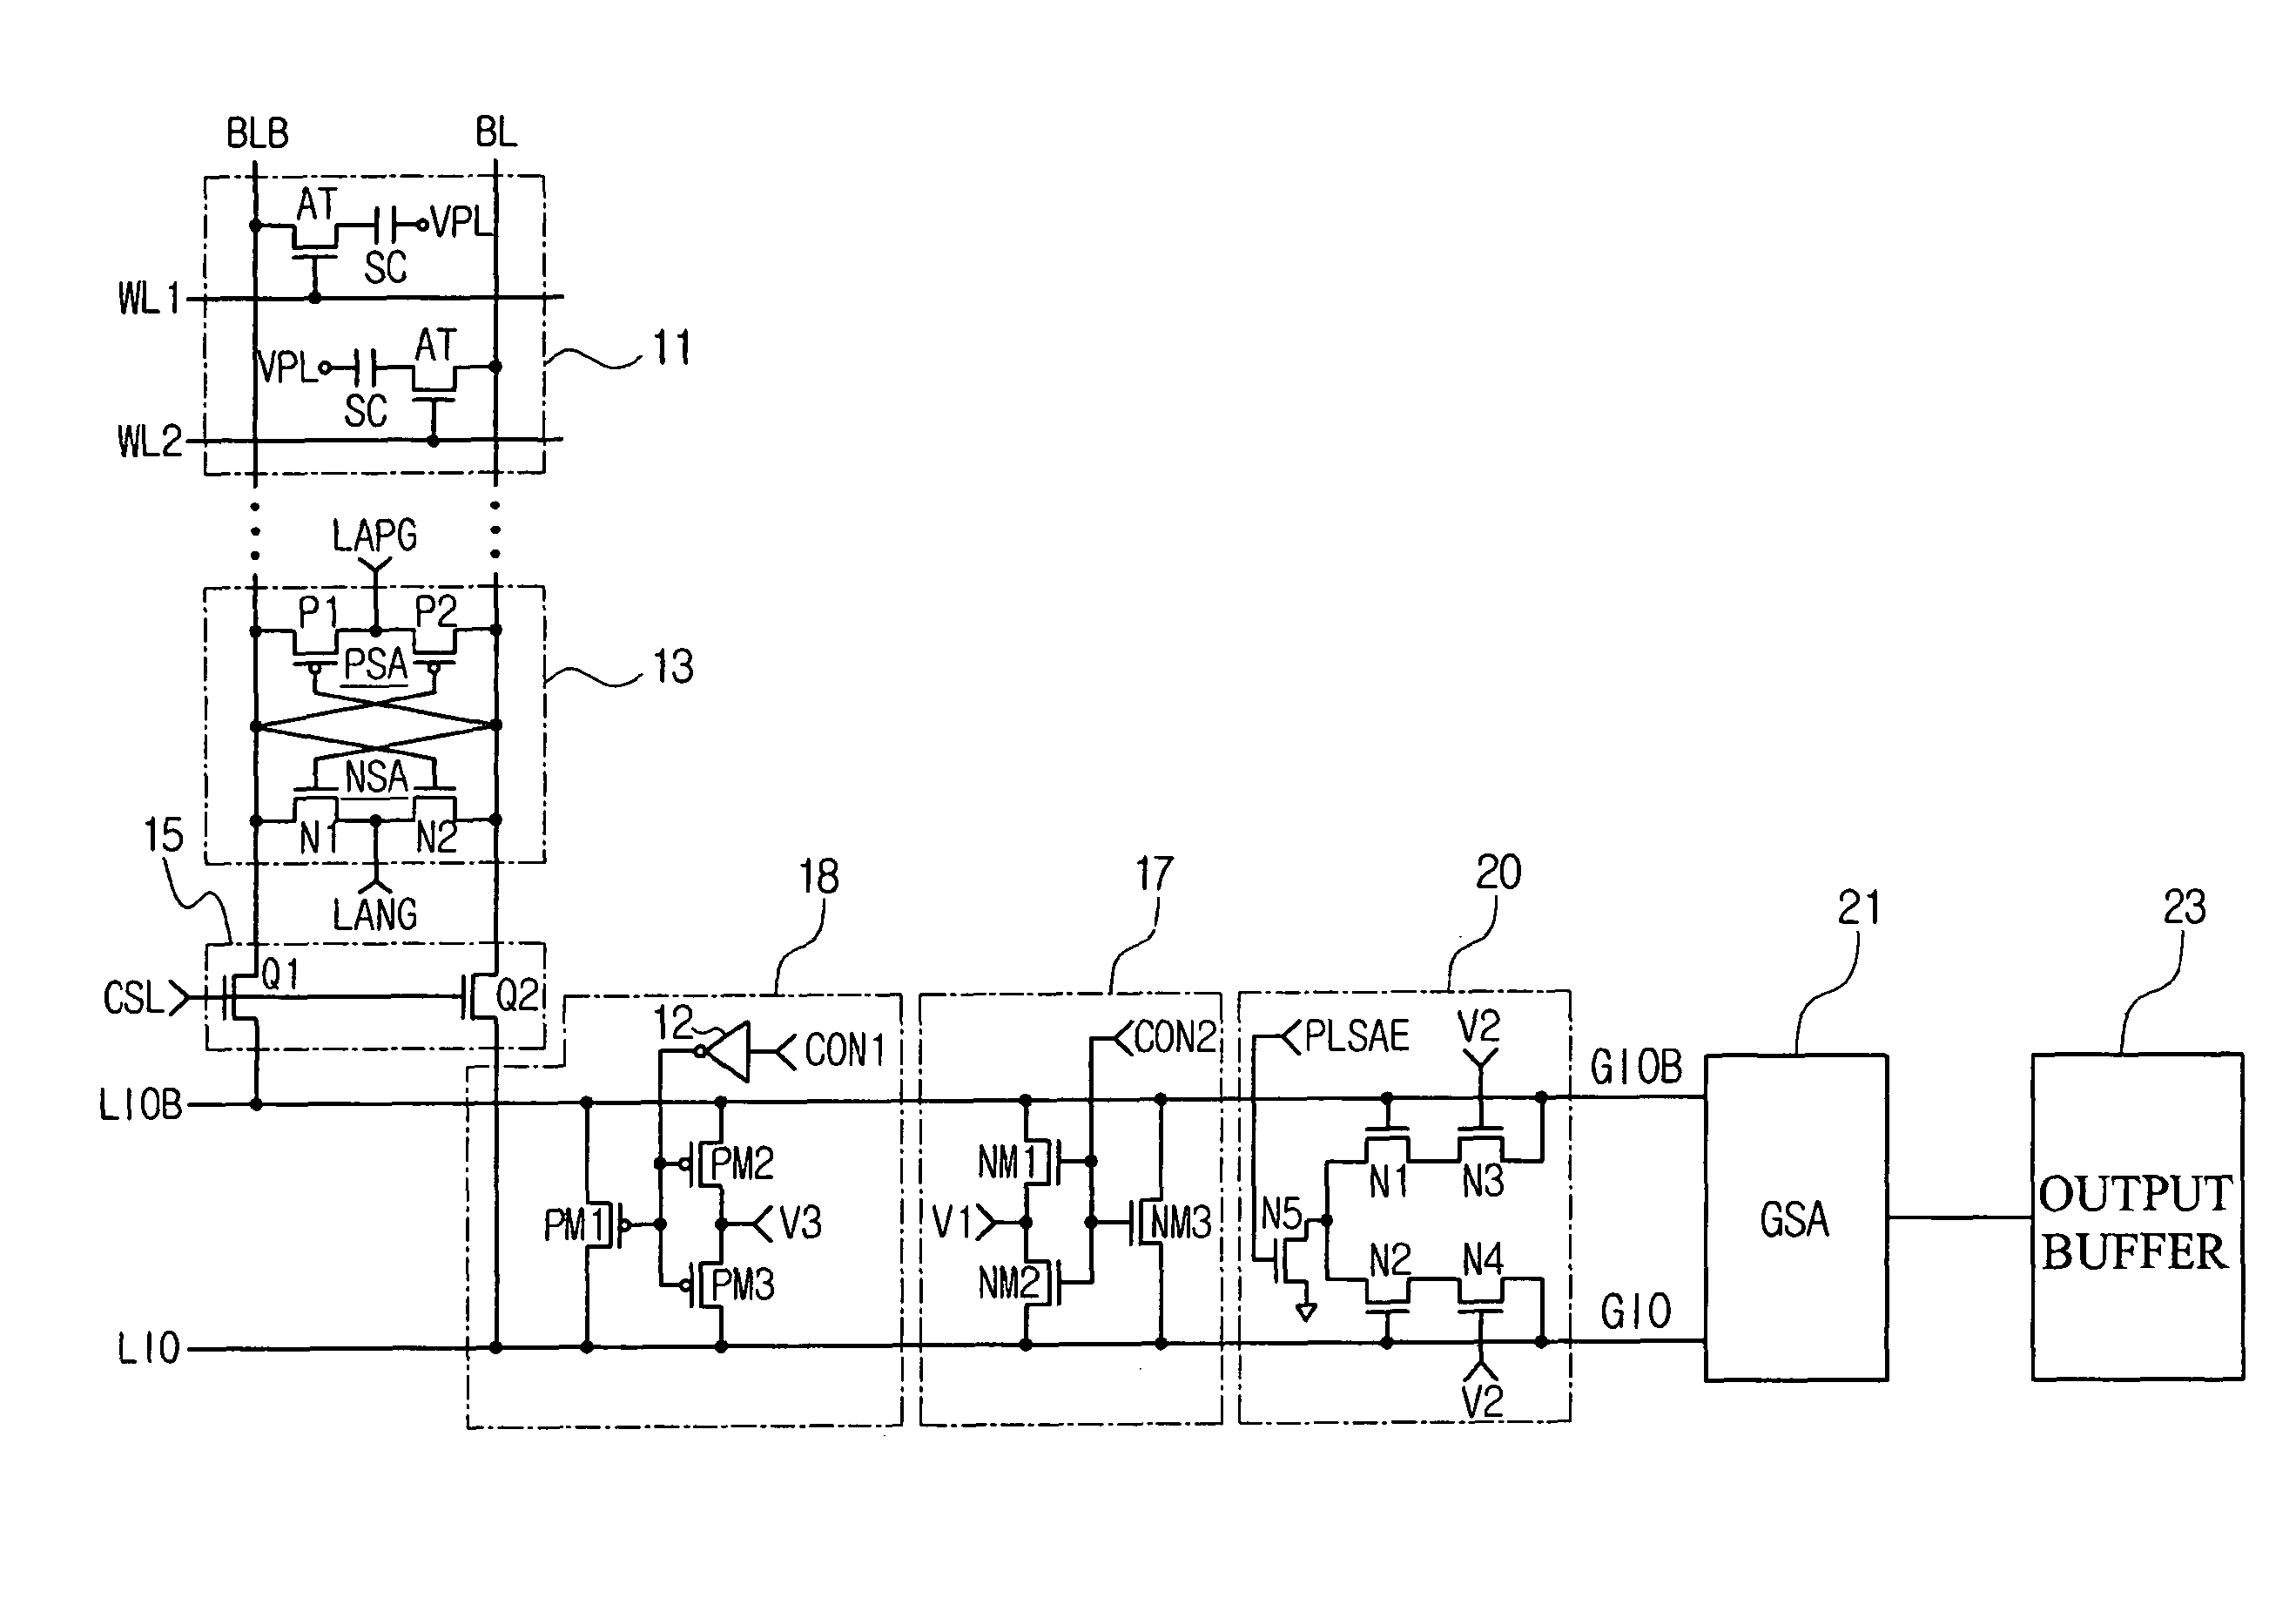 Semiconductor memory device having improved local input/output line precharge scheme